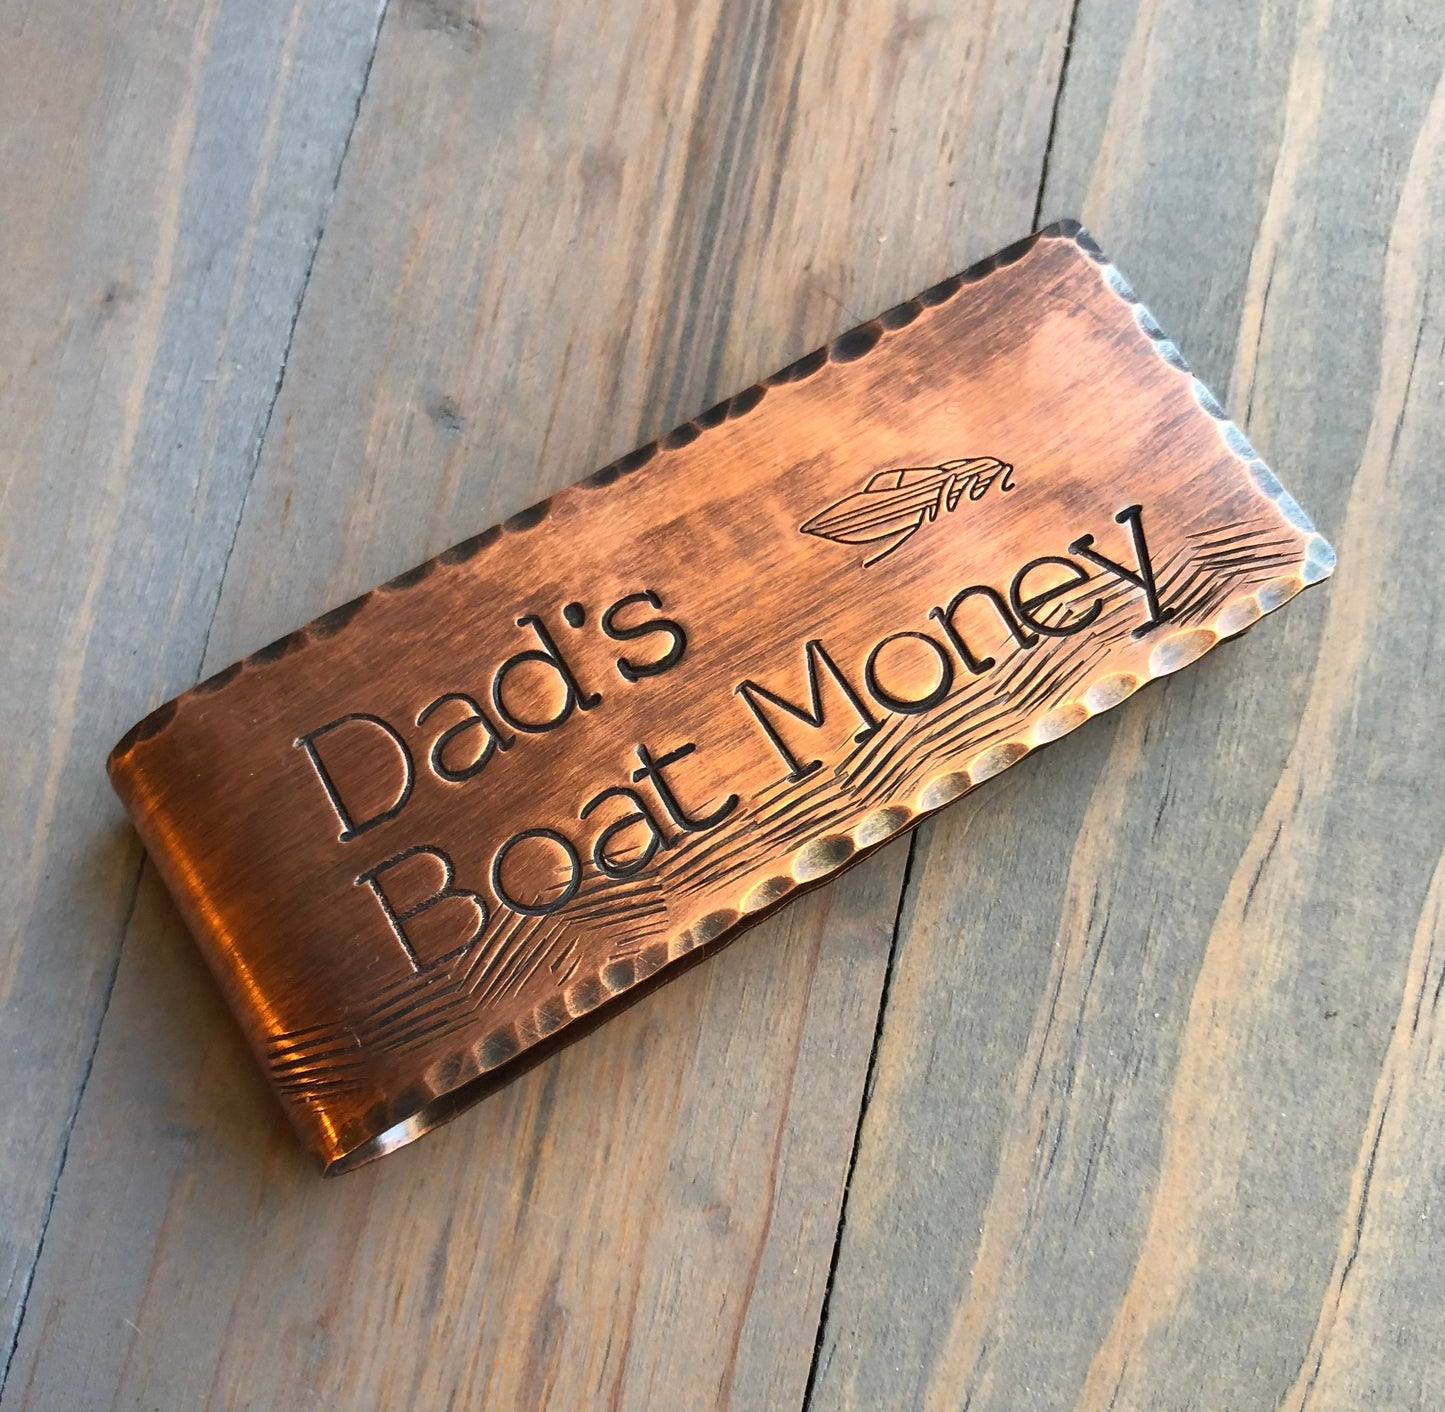 Copper Money Clip For Father's Day - Gift for Boater - Personalized Boating Money Clip - Custom Money Clip with Speed Boat - Power Boat Gift